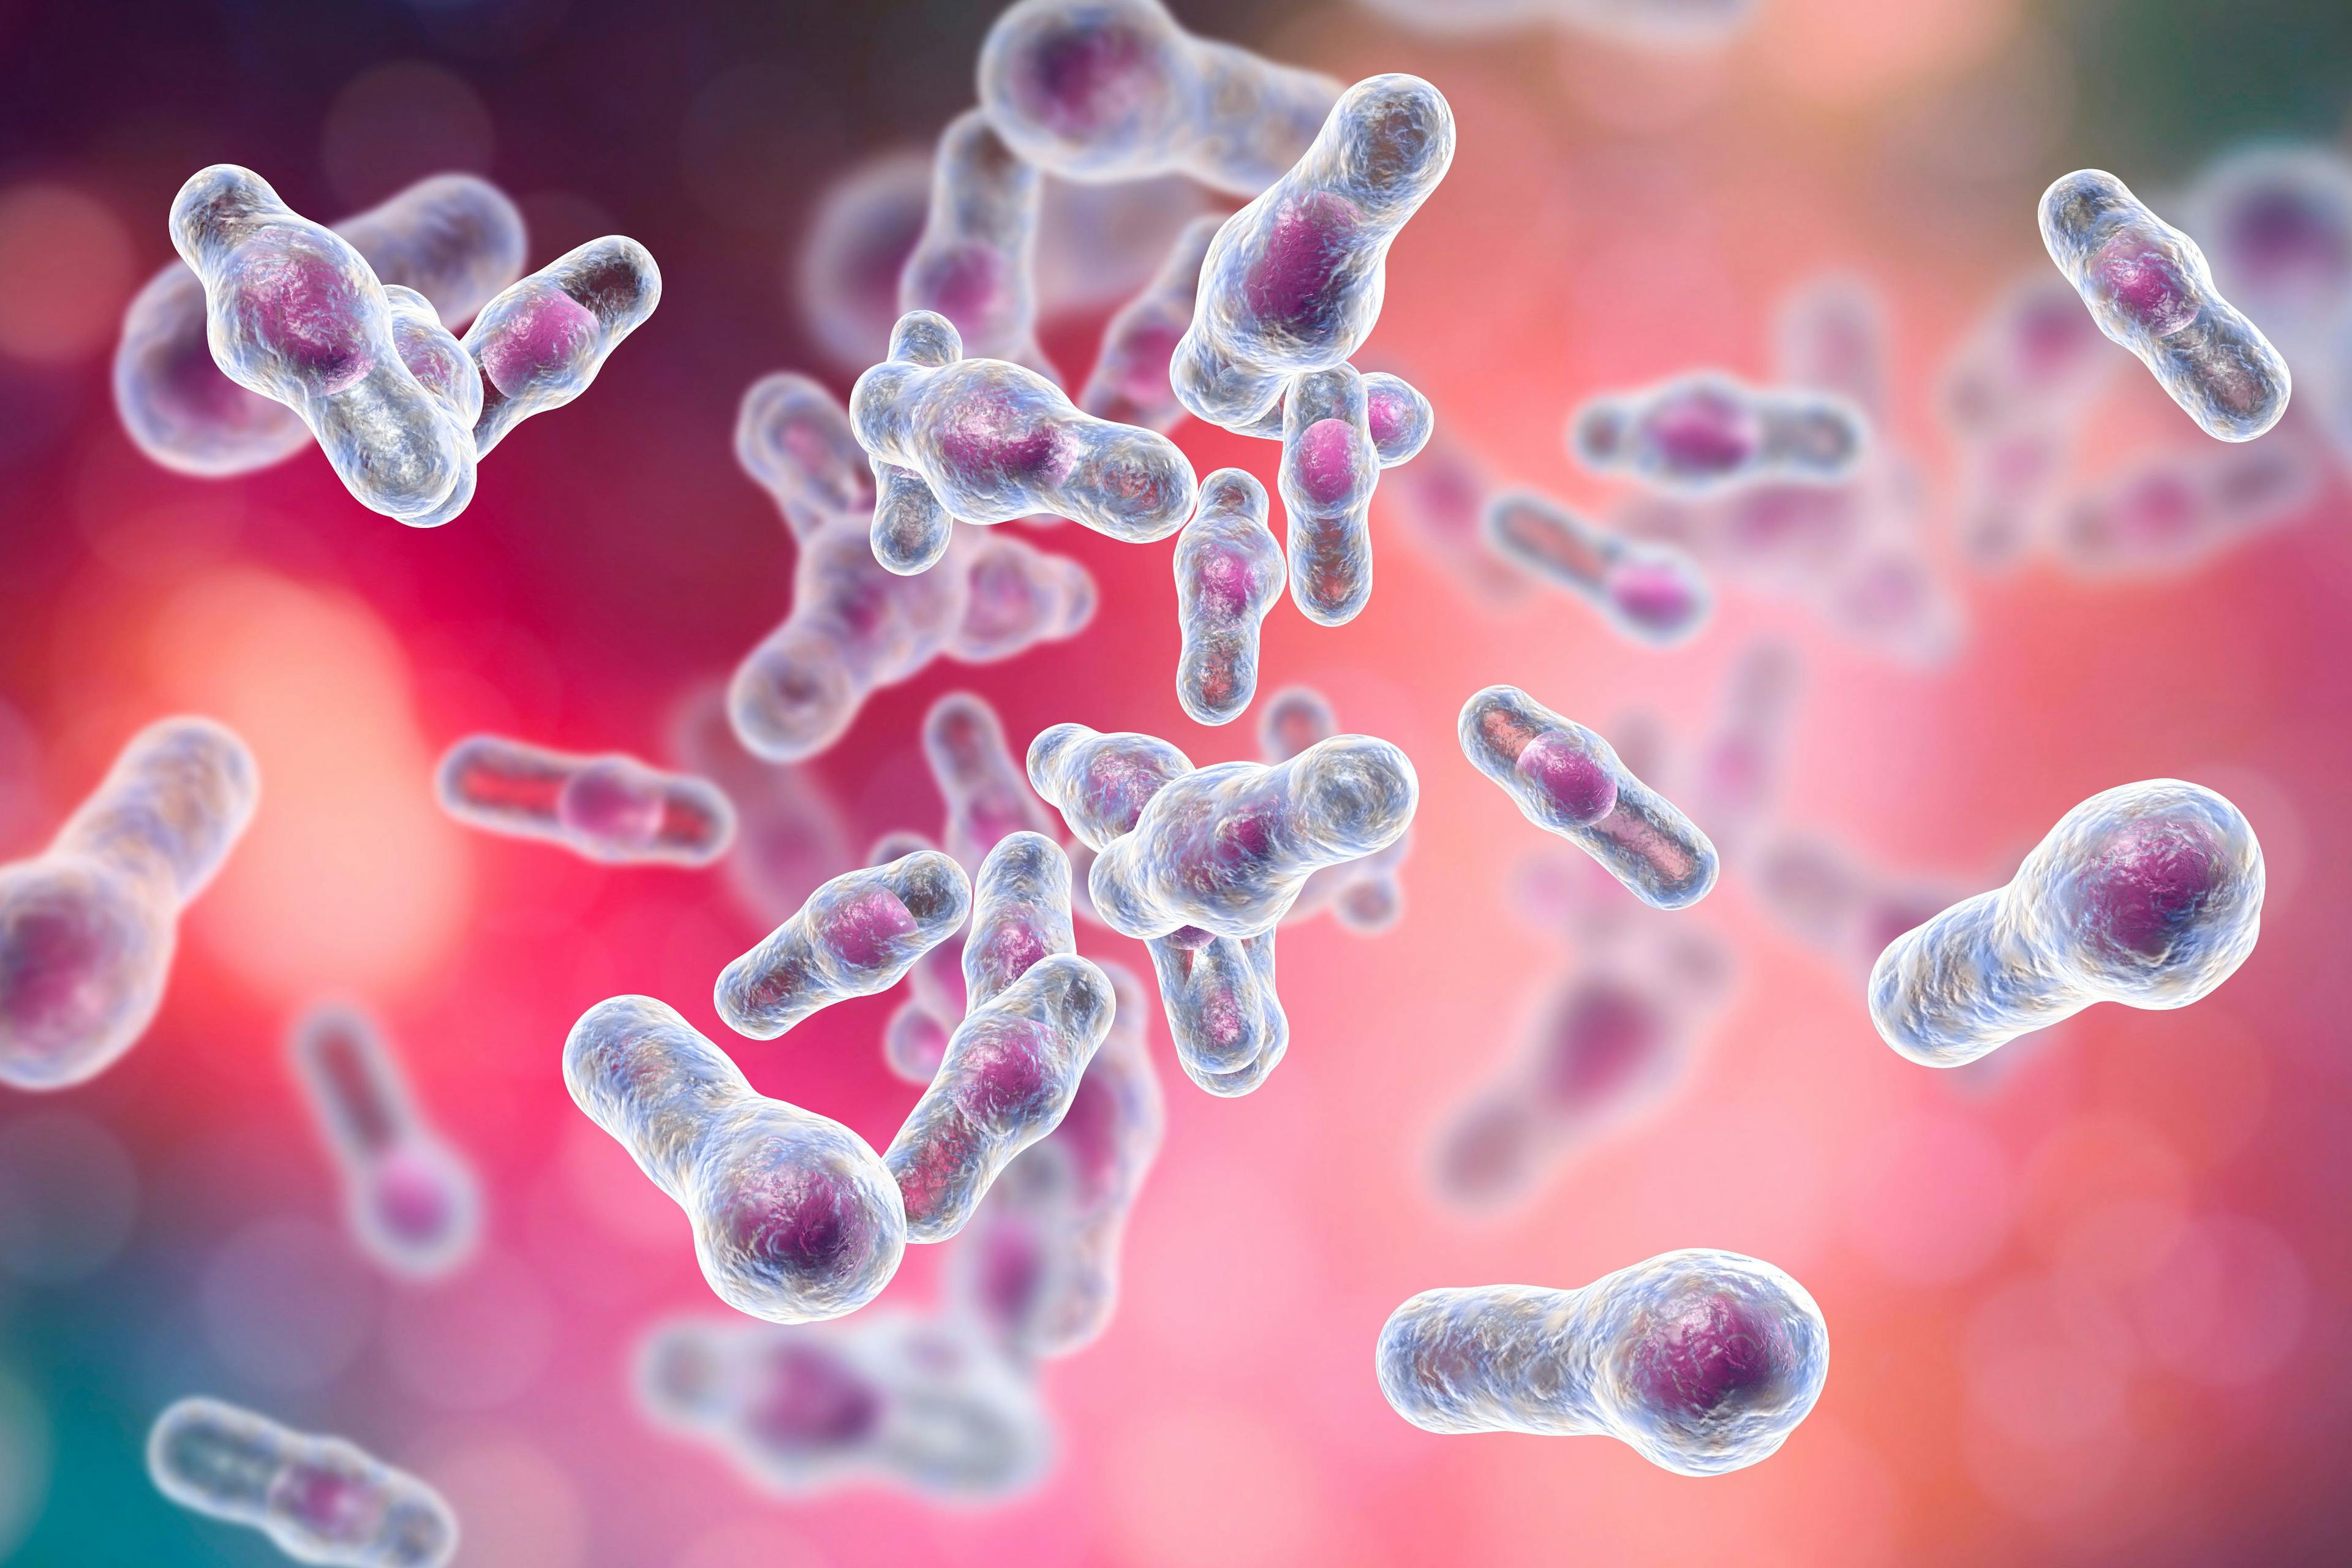 Testing the safety of bezlotoxumab to treat C difficile in children | Image Credit: © Dr_Microbe - © Dr_Microbe - stock.adobe.com.